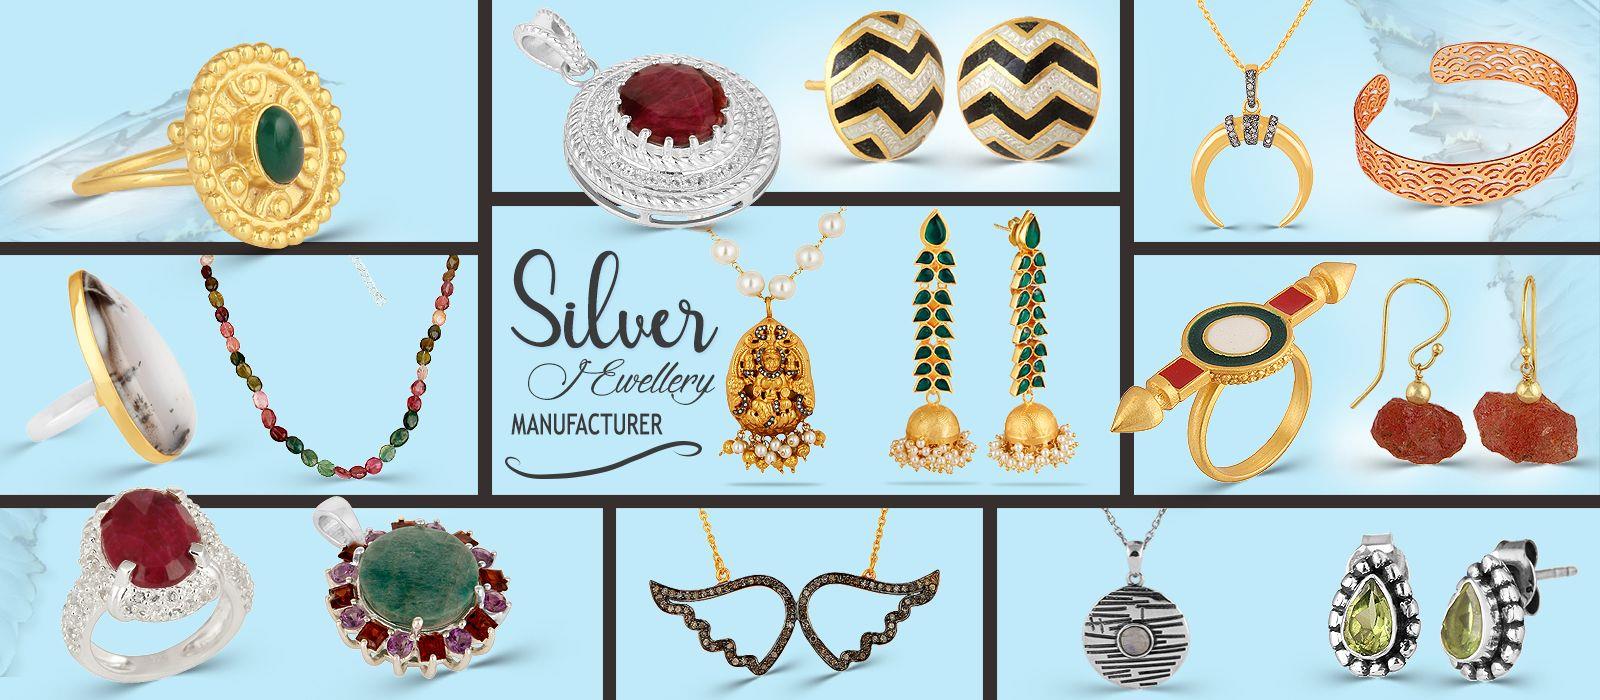 Silver Jewelry manufacturer